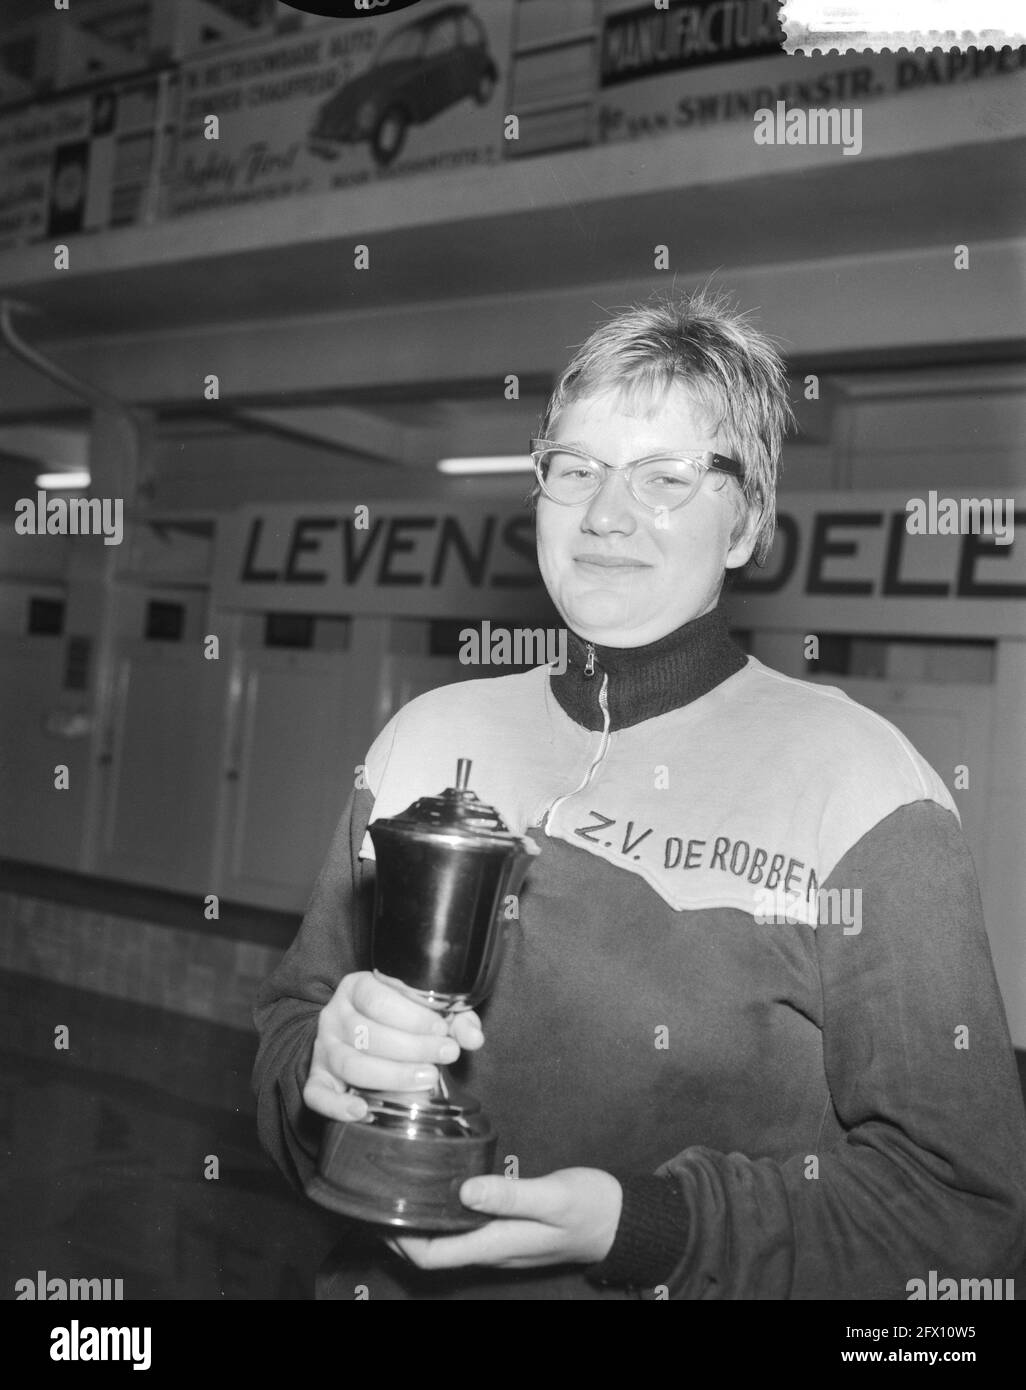 Swimming competitions in the Sportfondsenbad Oost for the title All round swimmer, Henny van de Velde, October 15, 1960, SPORTFONDSENBADEN, TITELS, SWIMMING COMPETITIONS, The Netherlands, 20th century press agency photo, news to remember, documentary, historic photography 1945-1990, visual stories, human history of the Twentieth Century, capturing moments in time Stock Photo